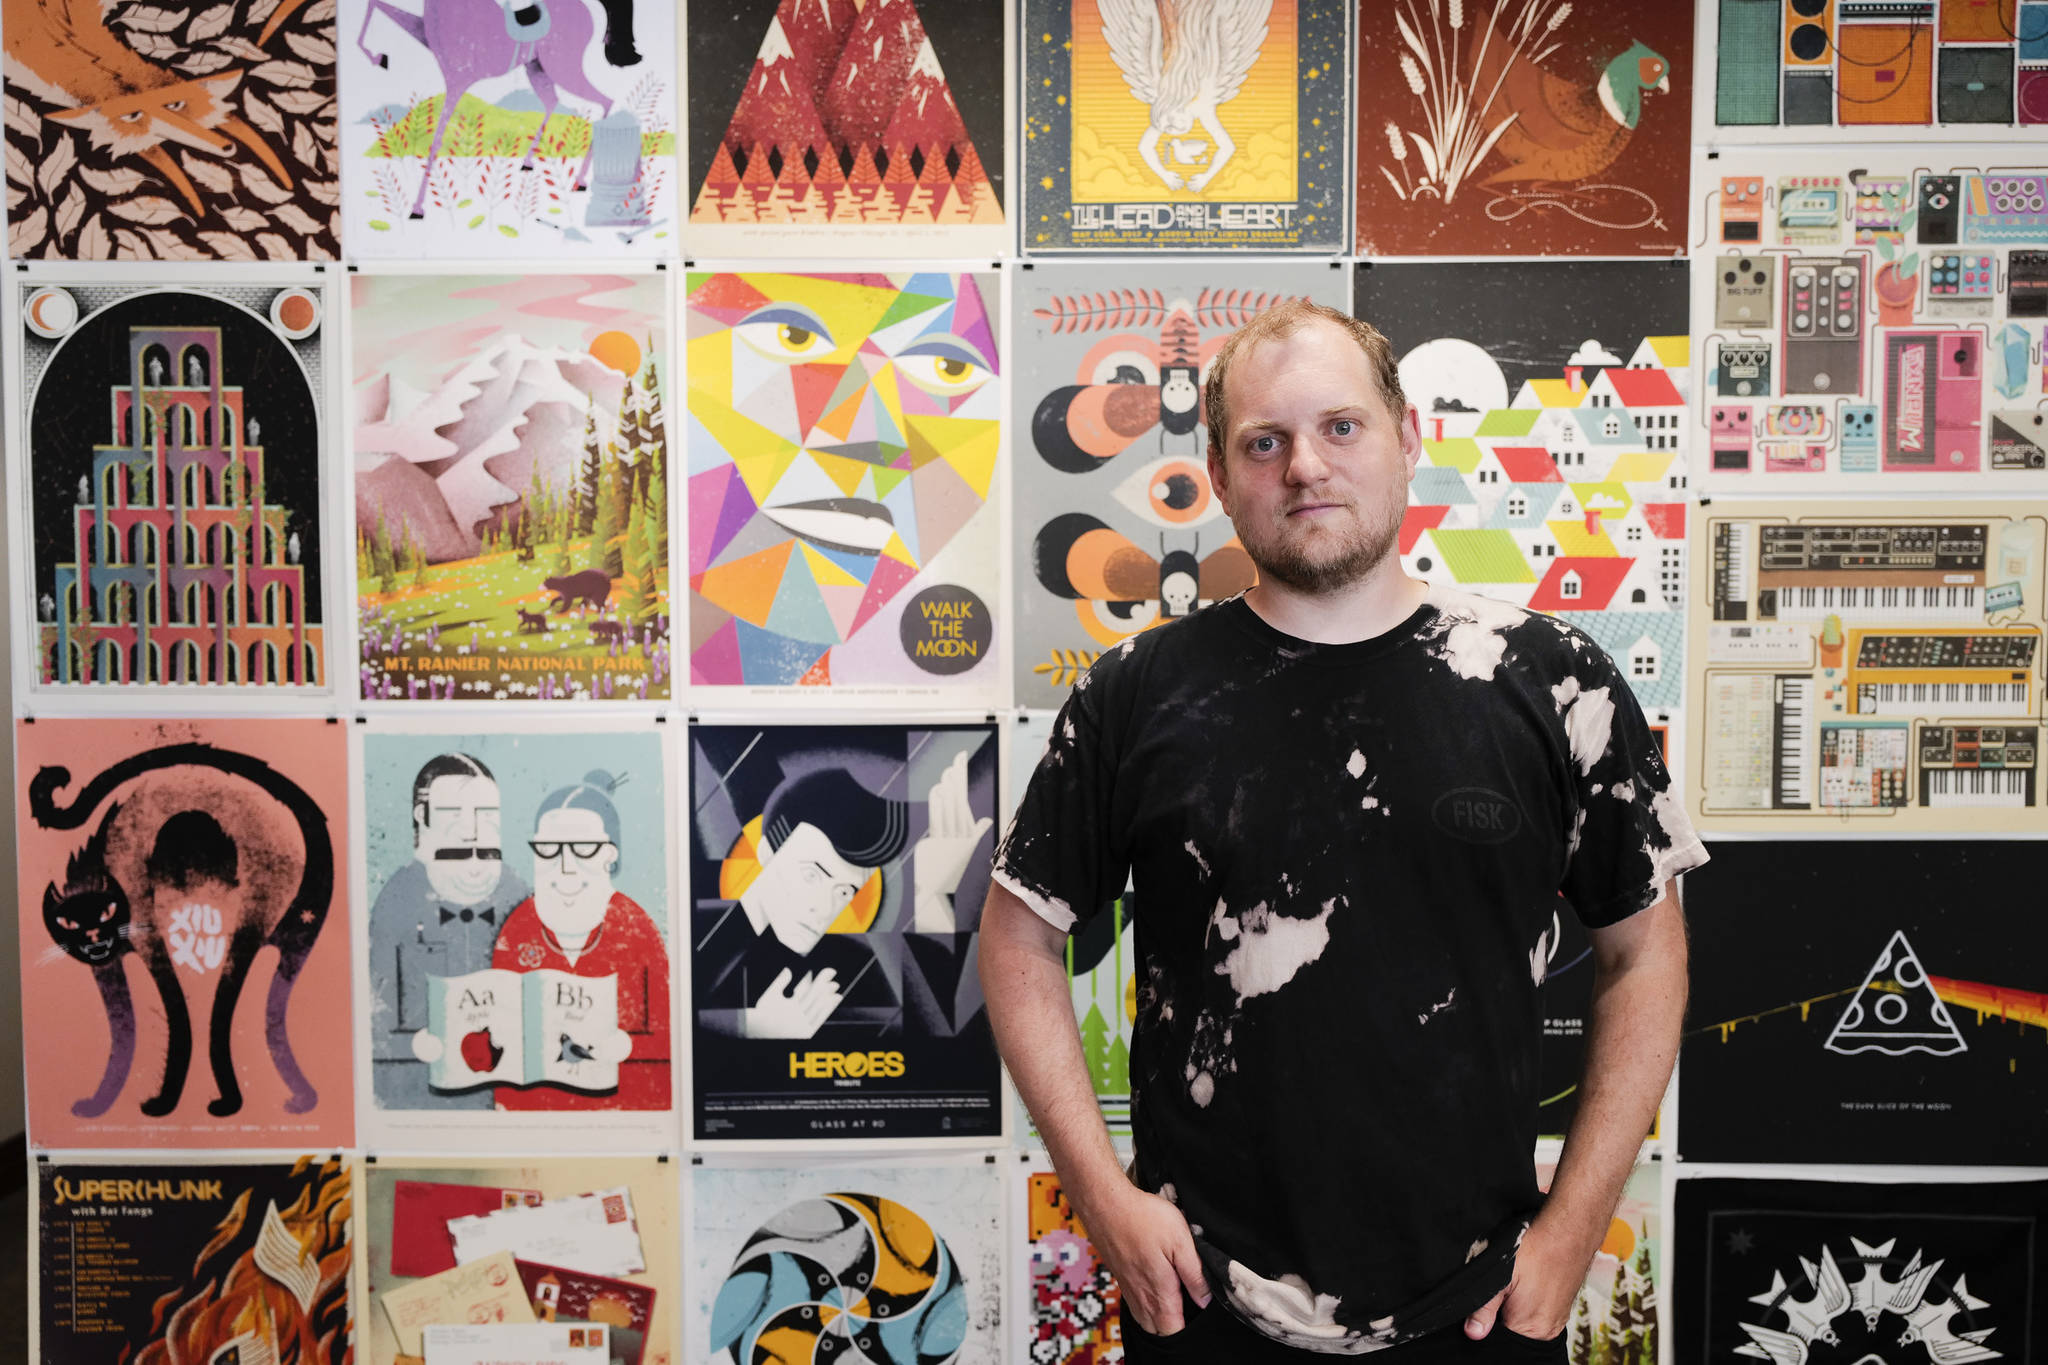 Eric Nyffeler, a designer from Portland, Oregon, stands with his work on display at Amalga Distillery for First Friday on Friday, July 5, 2019. (Michael Penn | Juneau Empire)